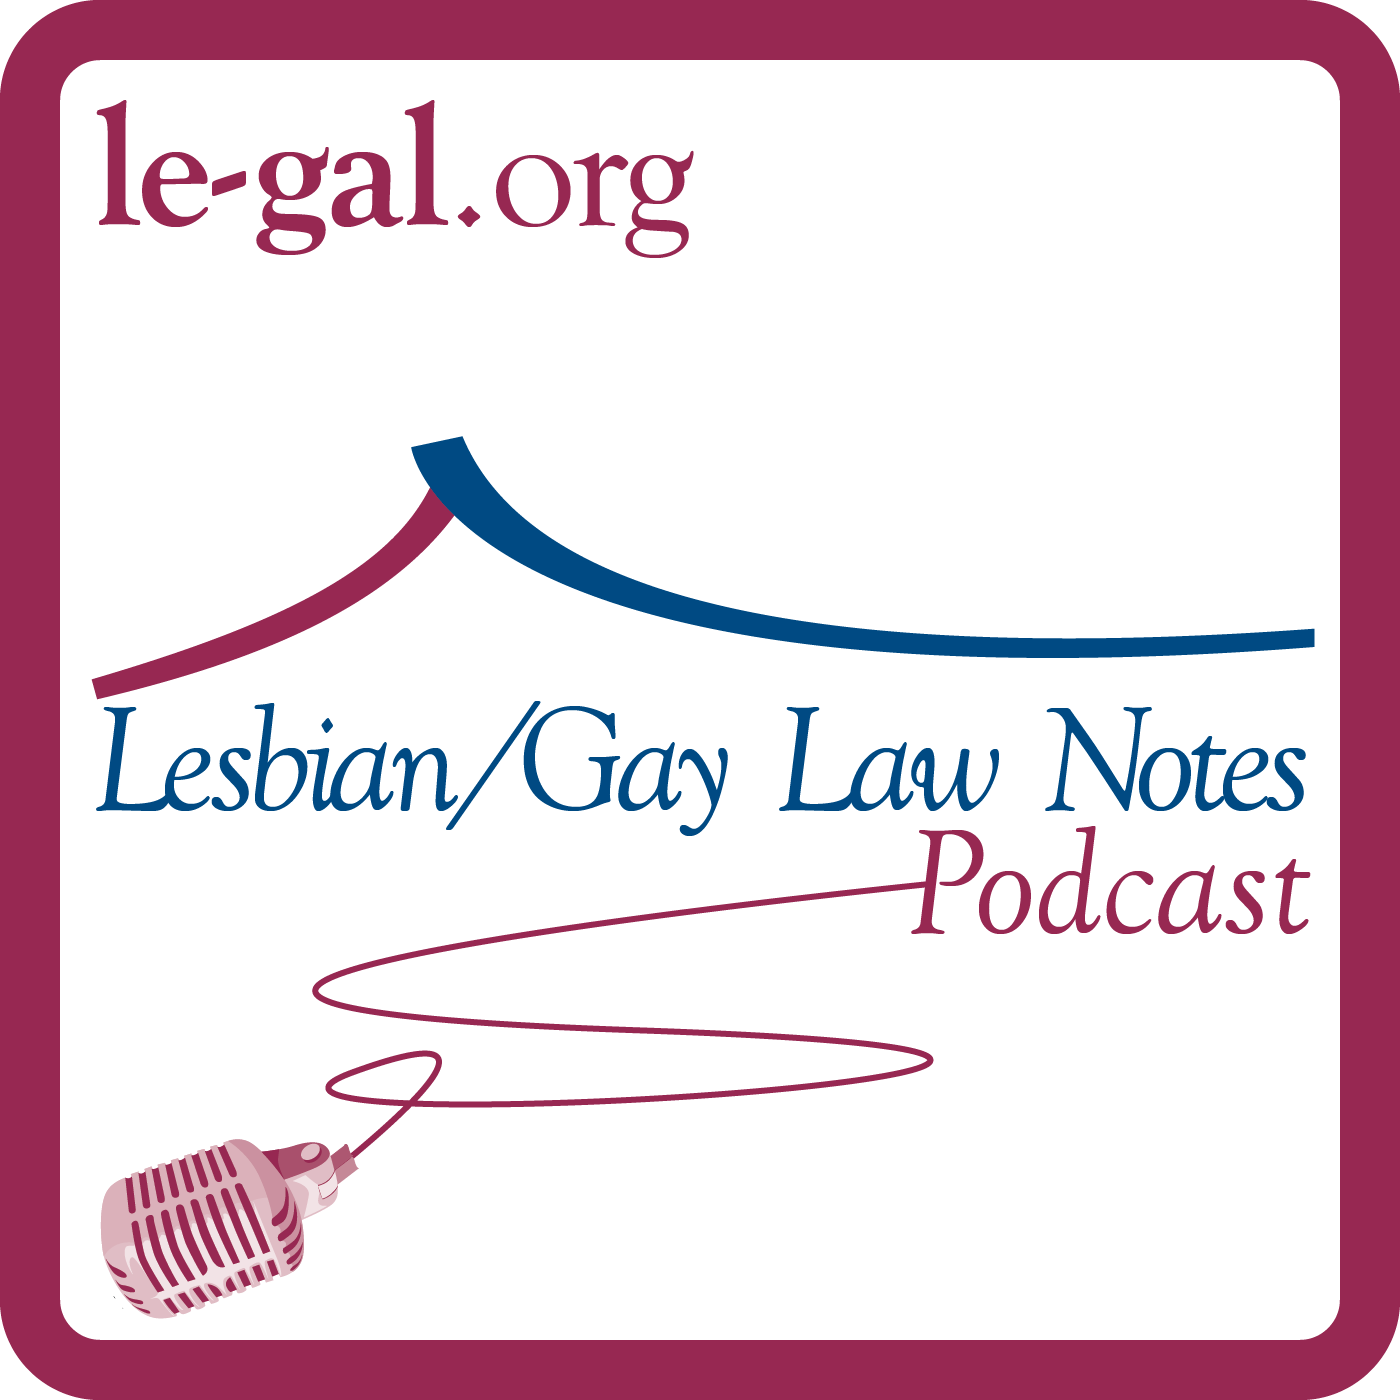  Lesbian/Gay Law Notes Podcast: May 2013